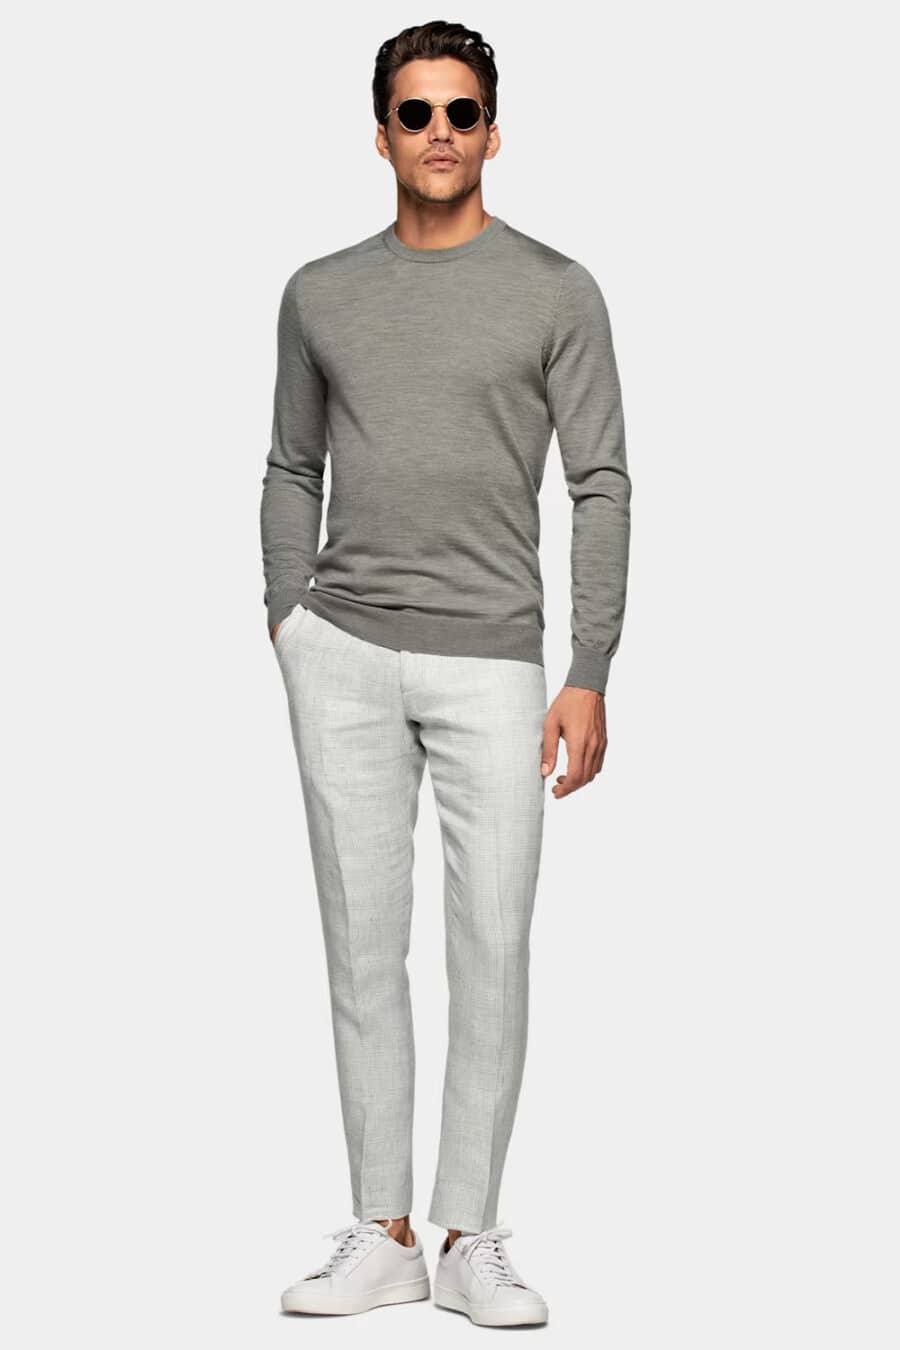 Men's light grey tailored pants worn sockless, long-sleeve grey merino wool sweater and white sneakers smart-casual outfit